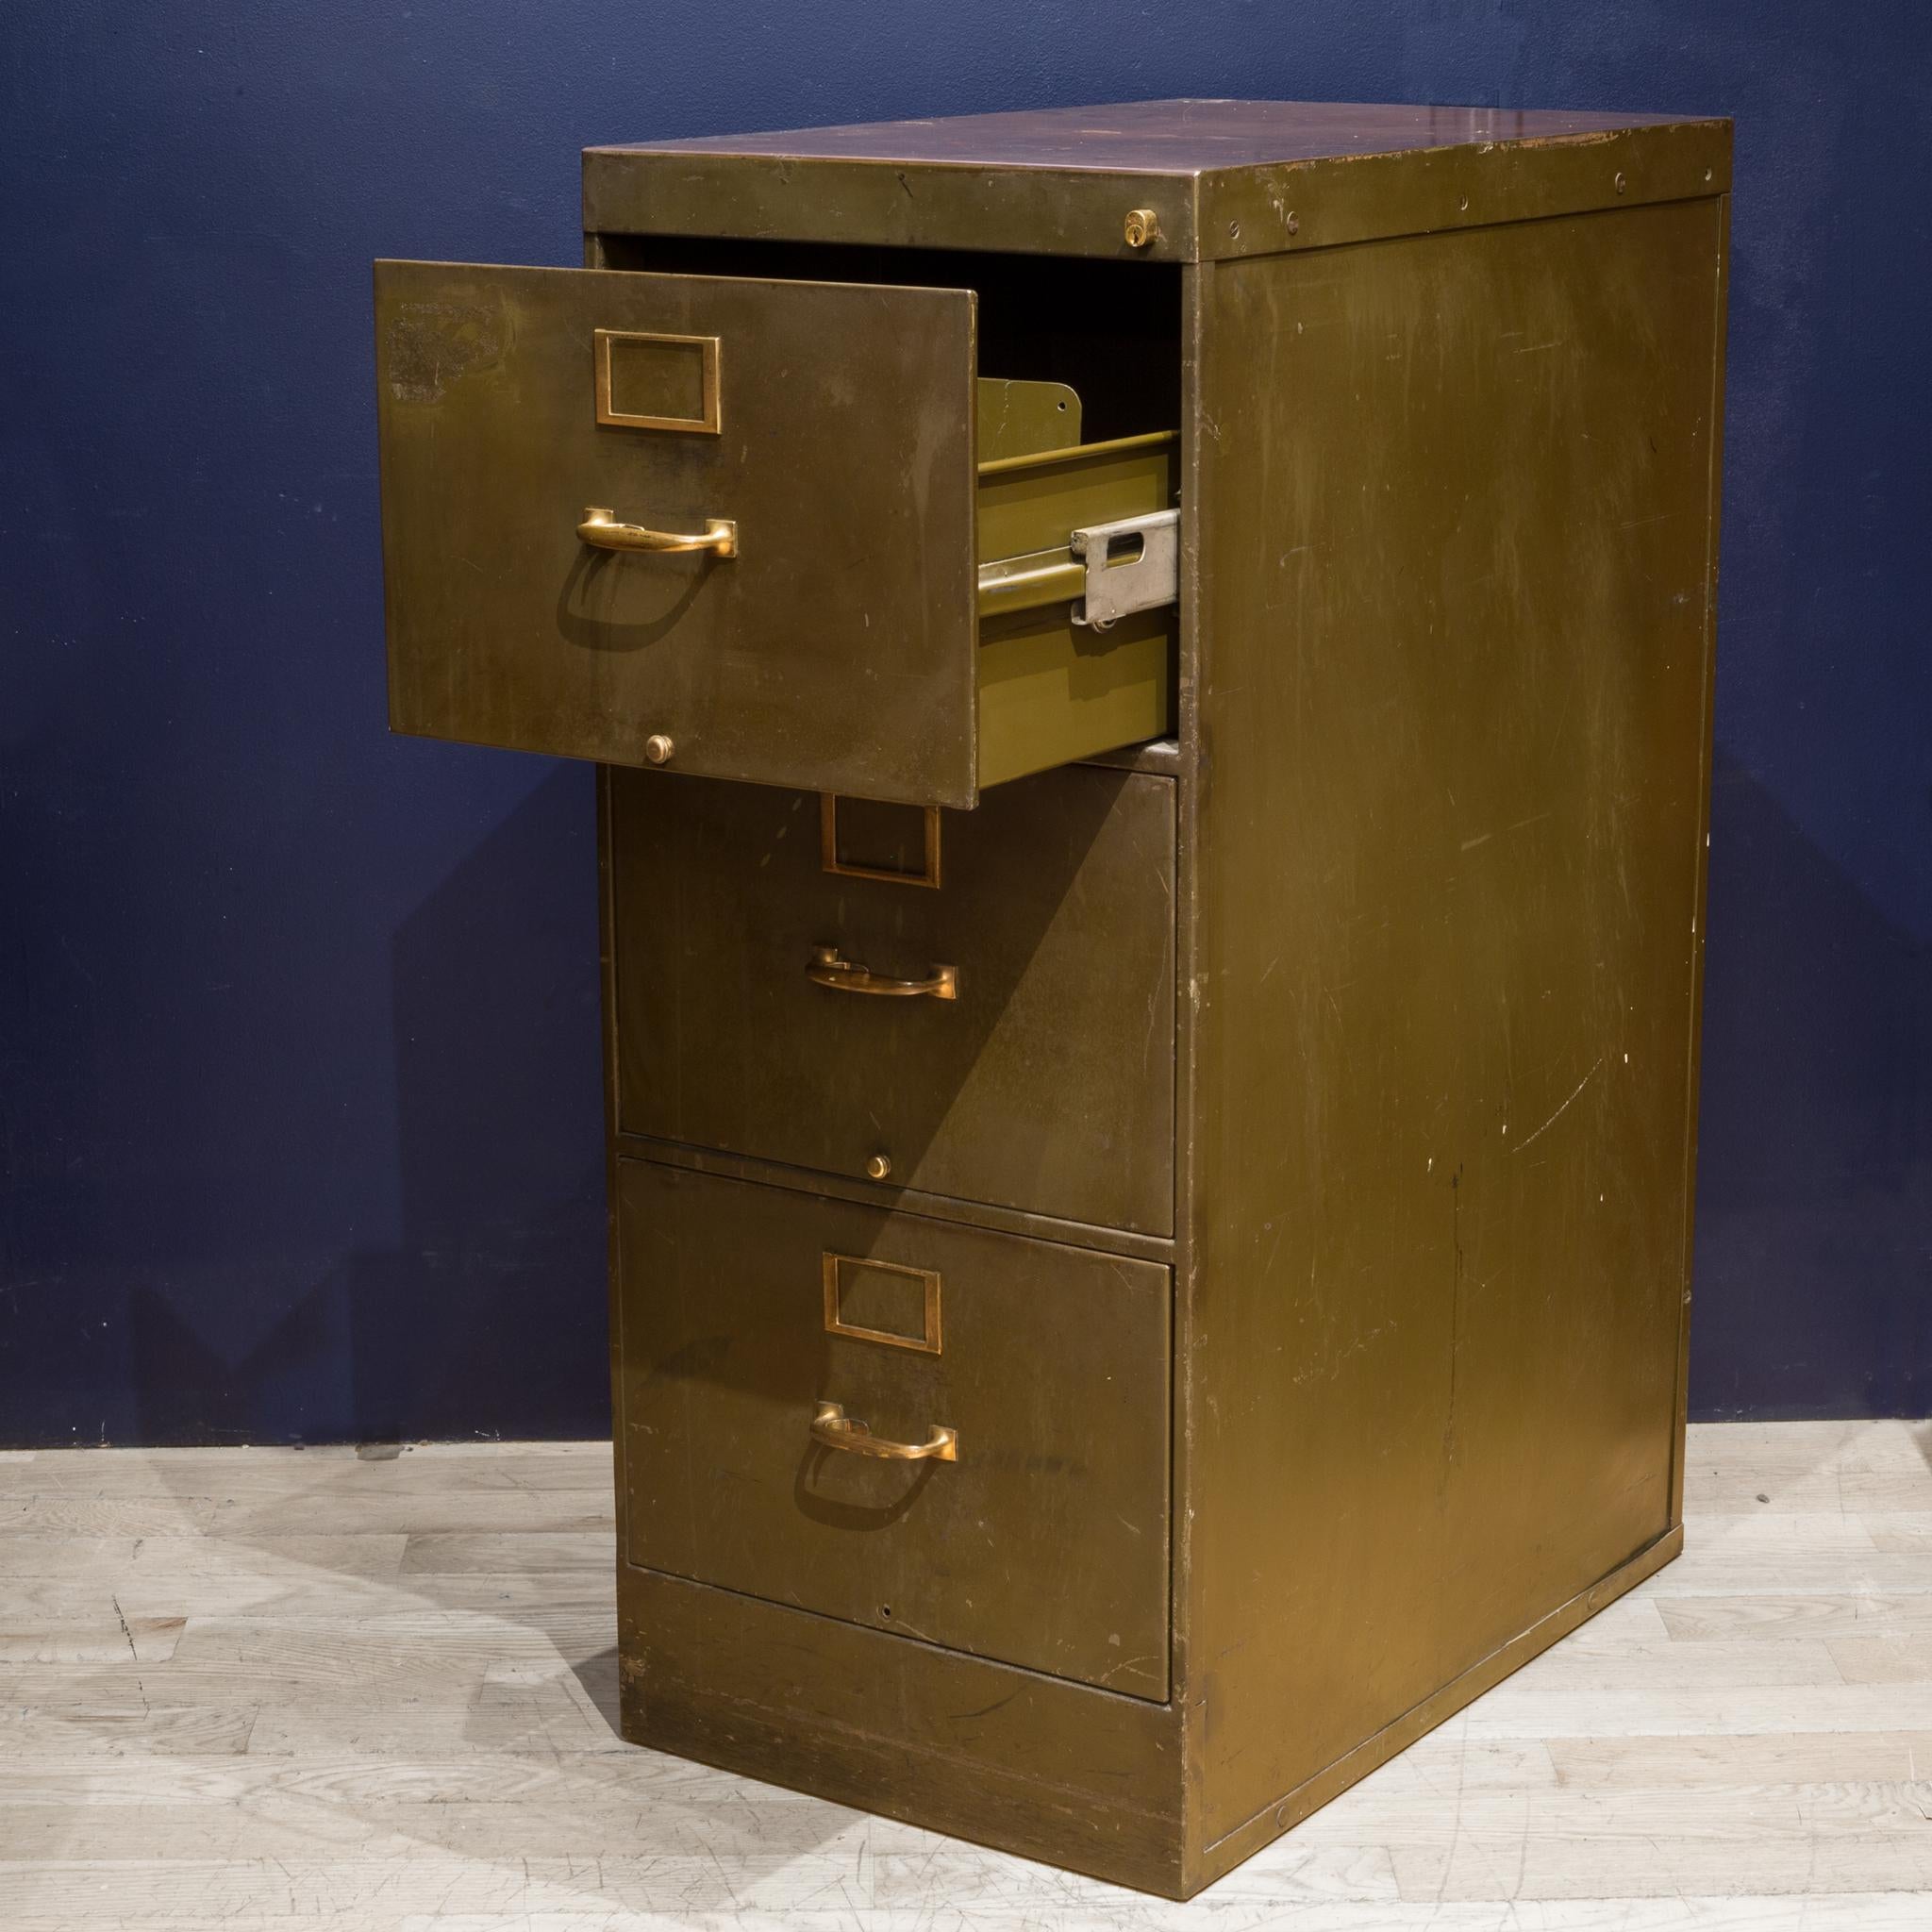 About

An antique army green steel file cabinet with three drawers and rich brown linoleum top. Each drawer has a divider that slides smoothly. Each handle has a unique release lever that unlocks the drawers. The handles, name plates and locks are